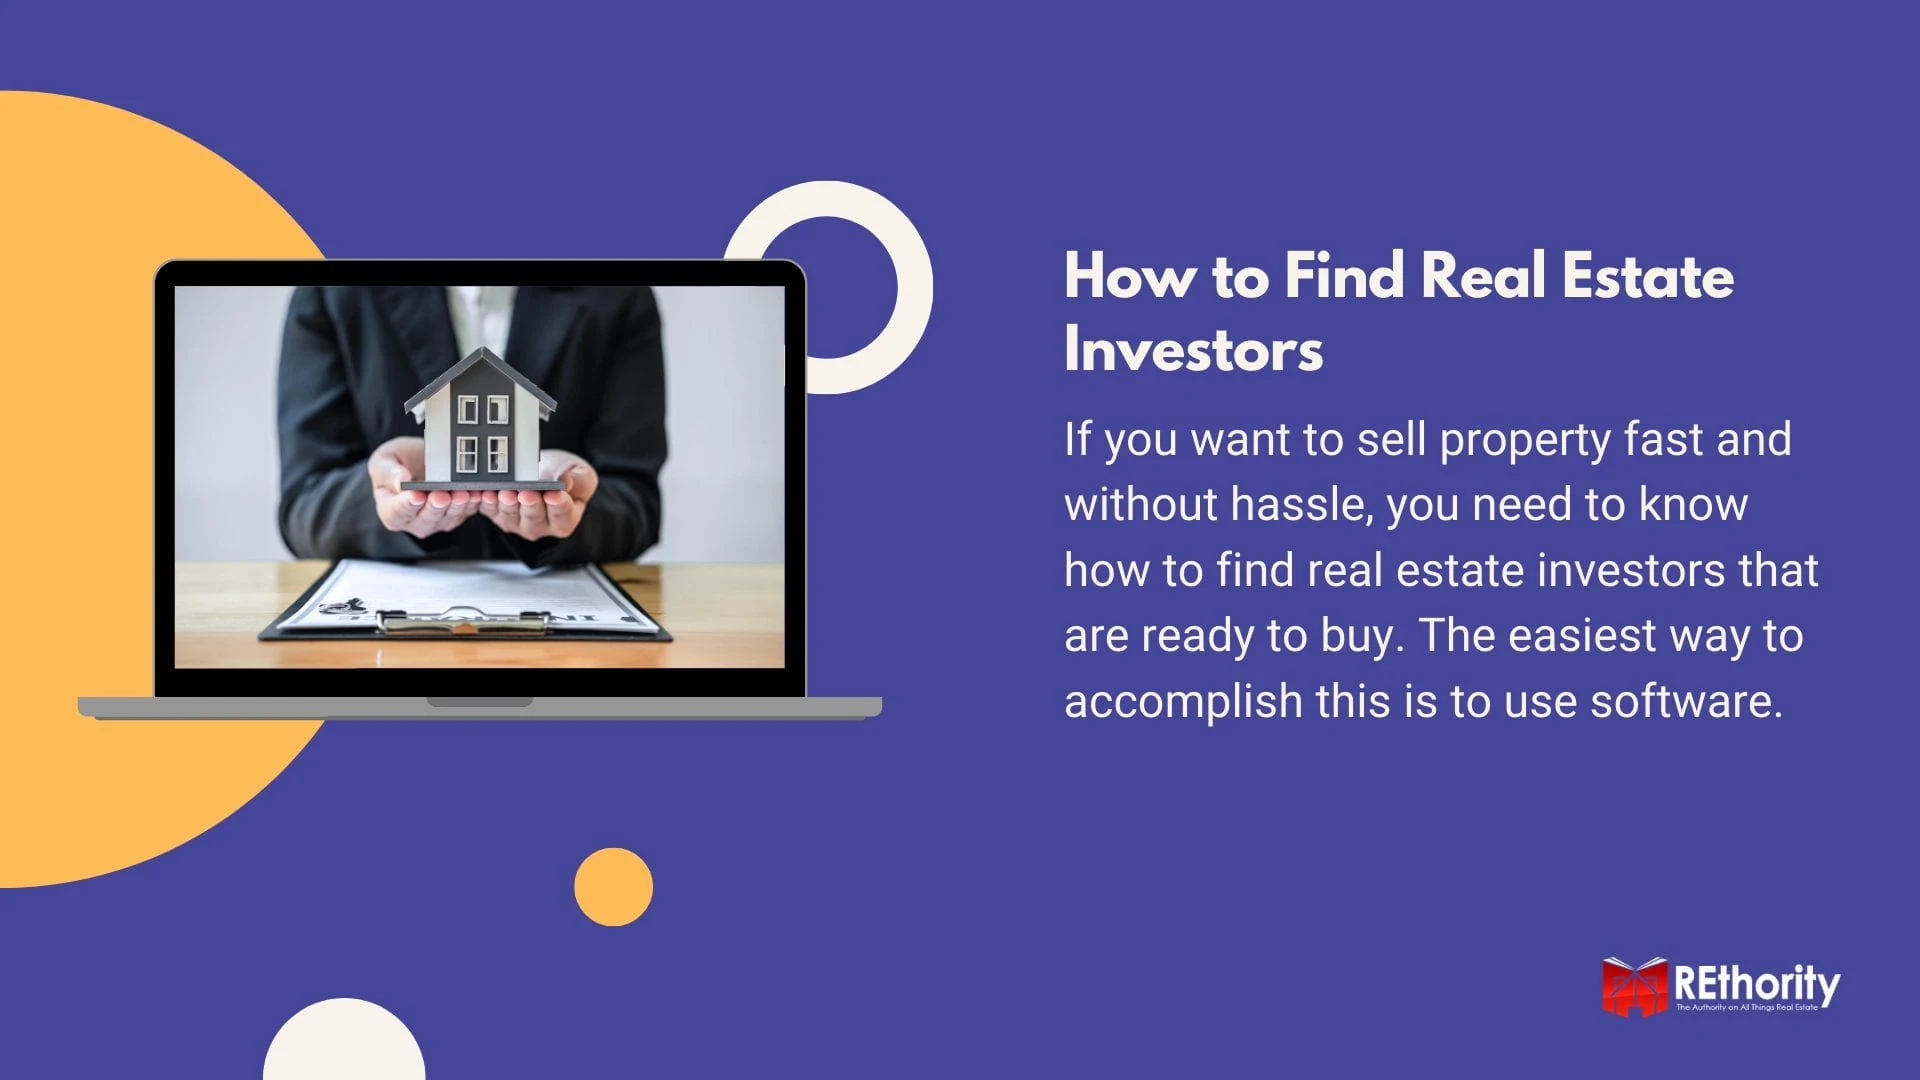 How to find real estate investors graphic with an explainer of why this is necessary and a computer photo of hands holding a model house